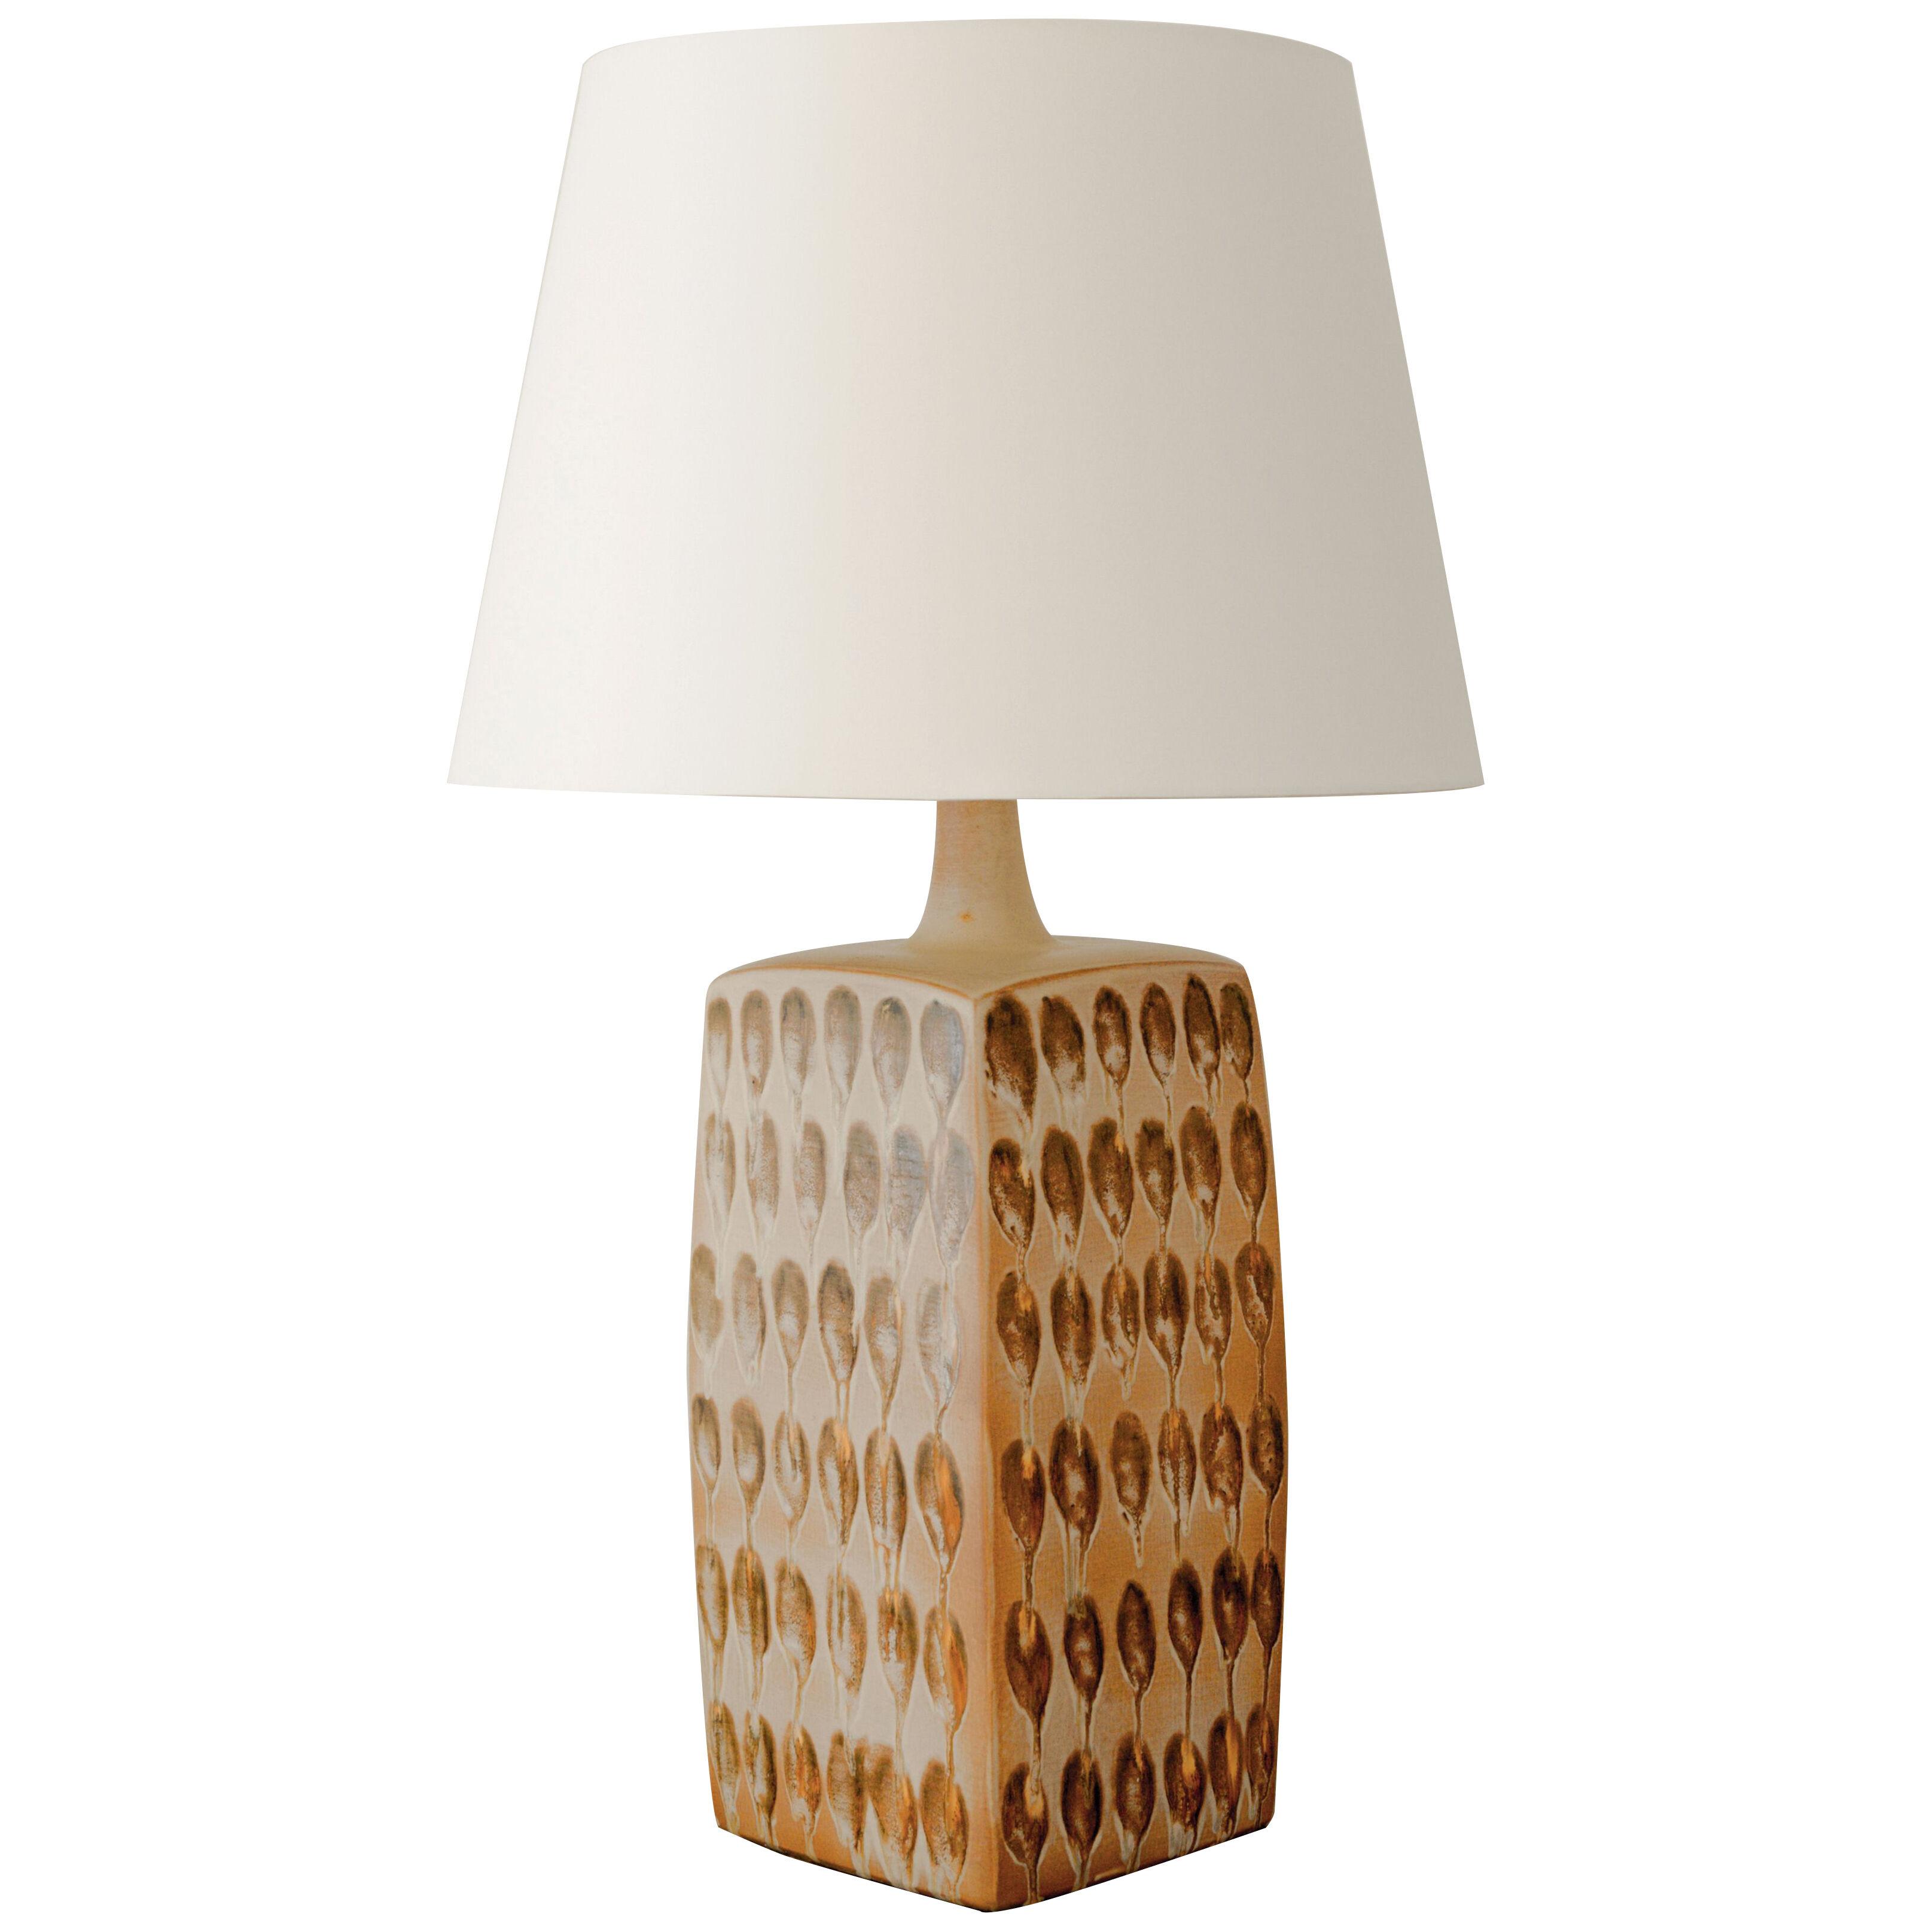 Monumental Square Earthenware Table Lamp